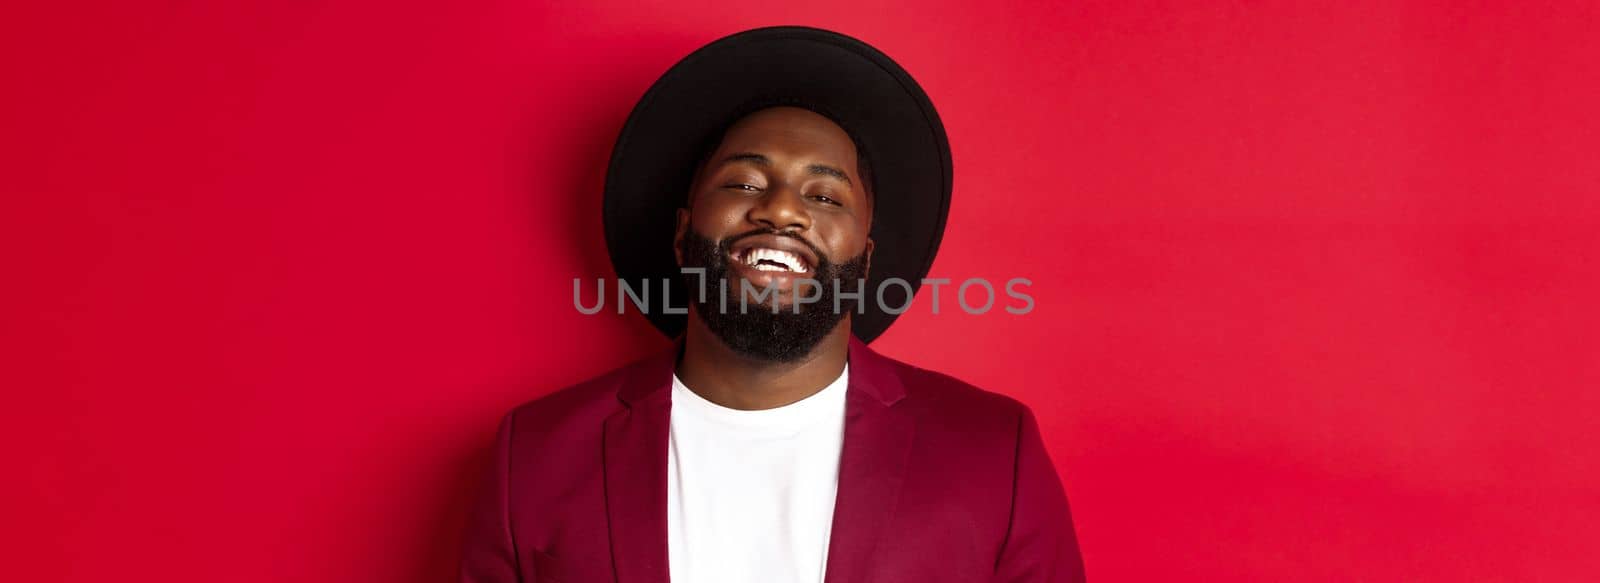 Close-up of happy handsome Black man smiling at you, looking pleased, wearing black hat and blazer, red background.